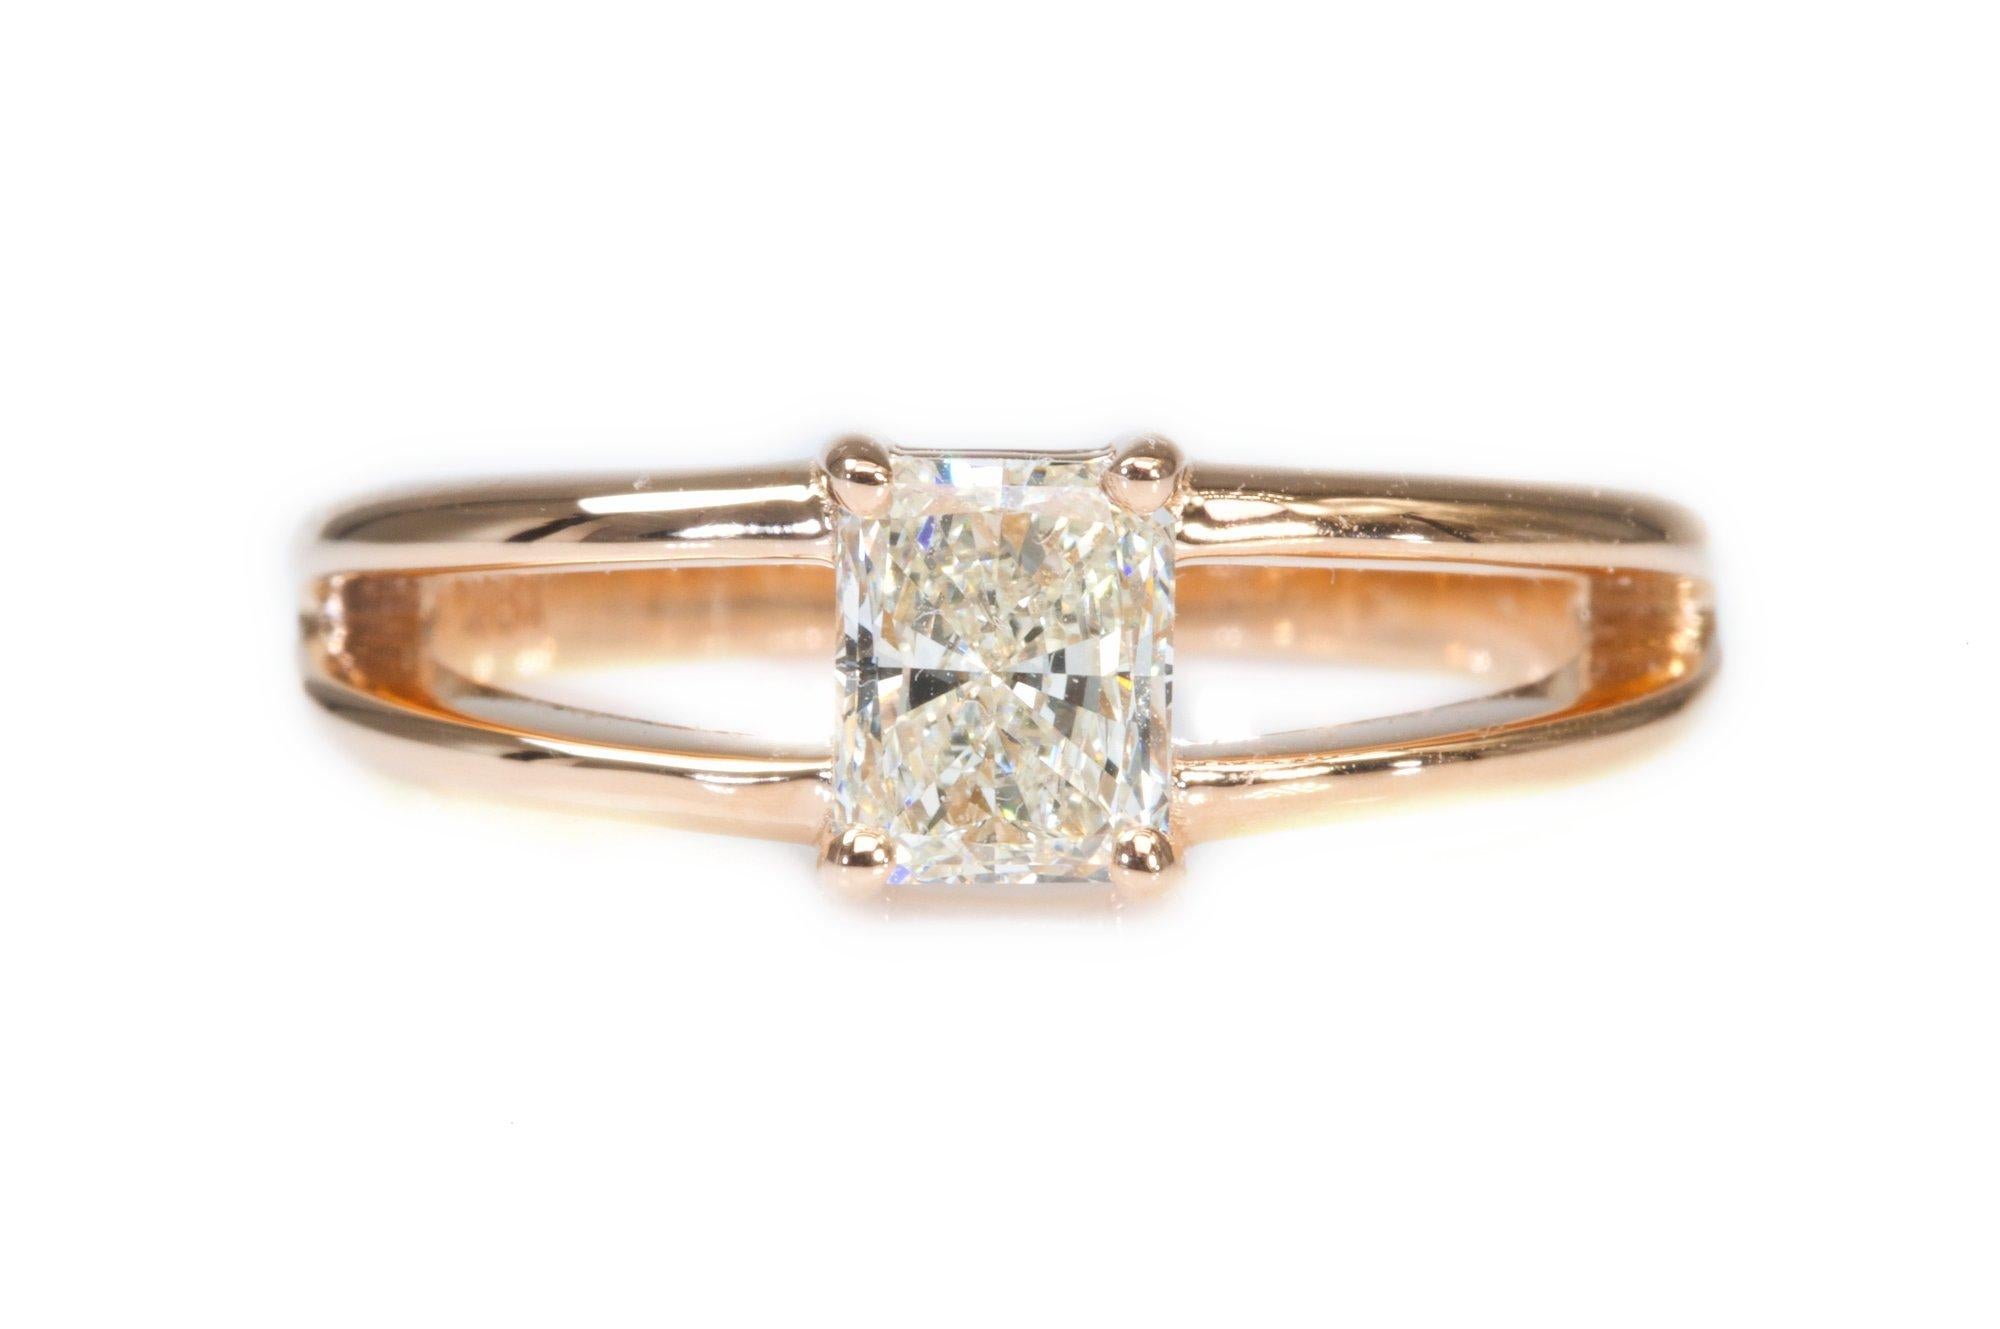 A stunning classic solitaire ring with a dazzling 0.50 carat radiant cut natural diamond in I VS1 mounted in a spilt shank setting made of 18K white gold with a high quality polish. The main stone is engraved with a laser inscription and has a GIA